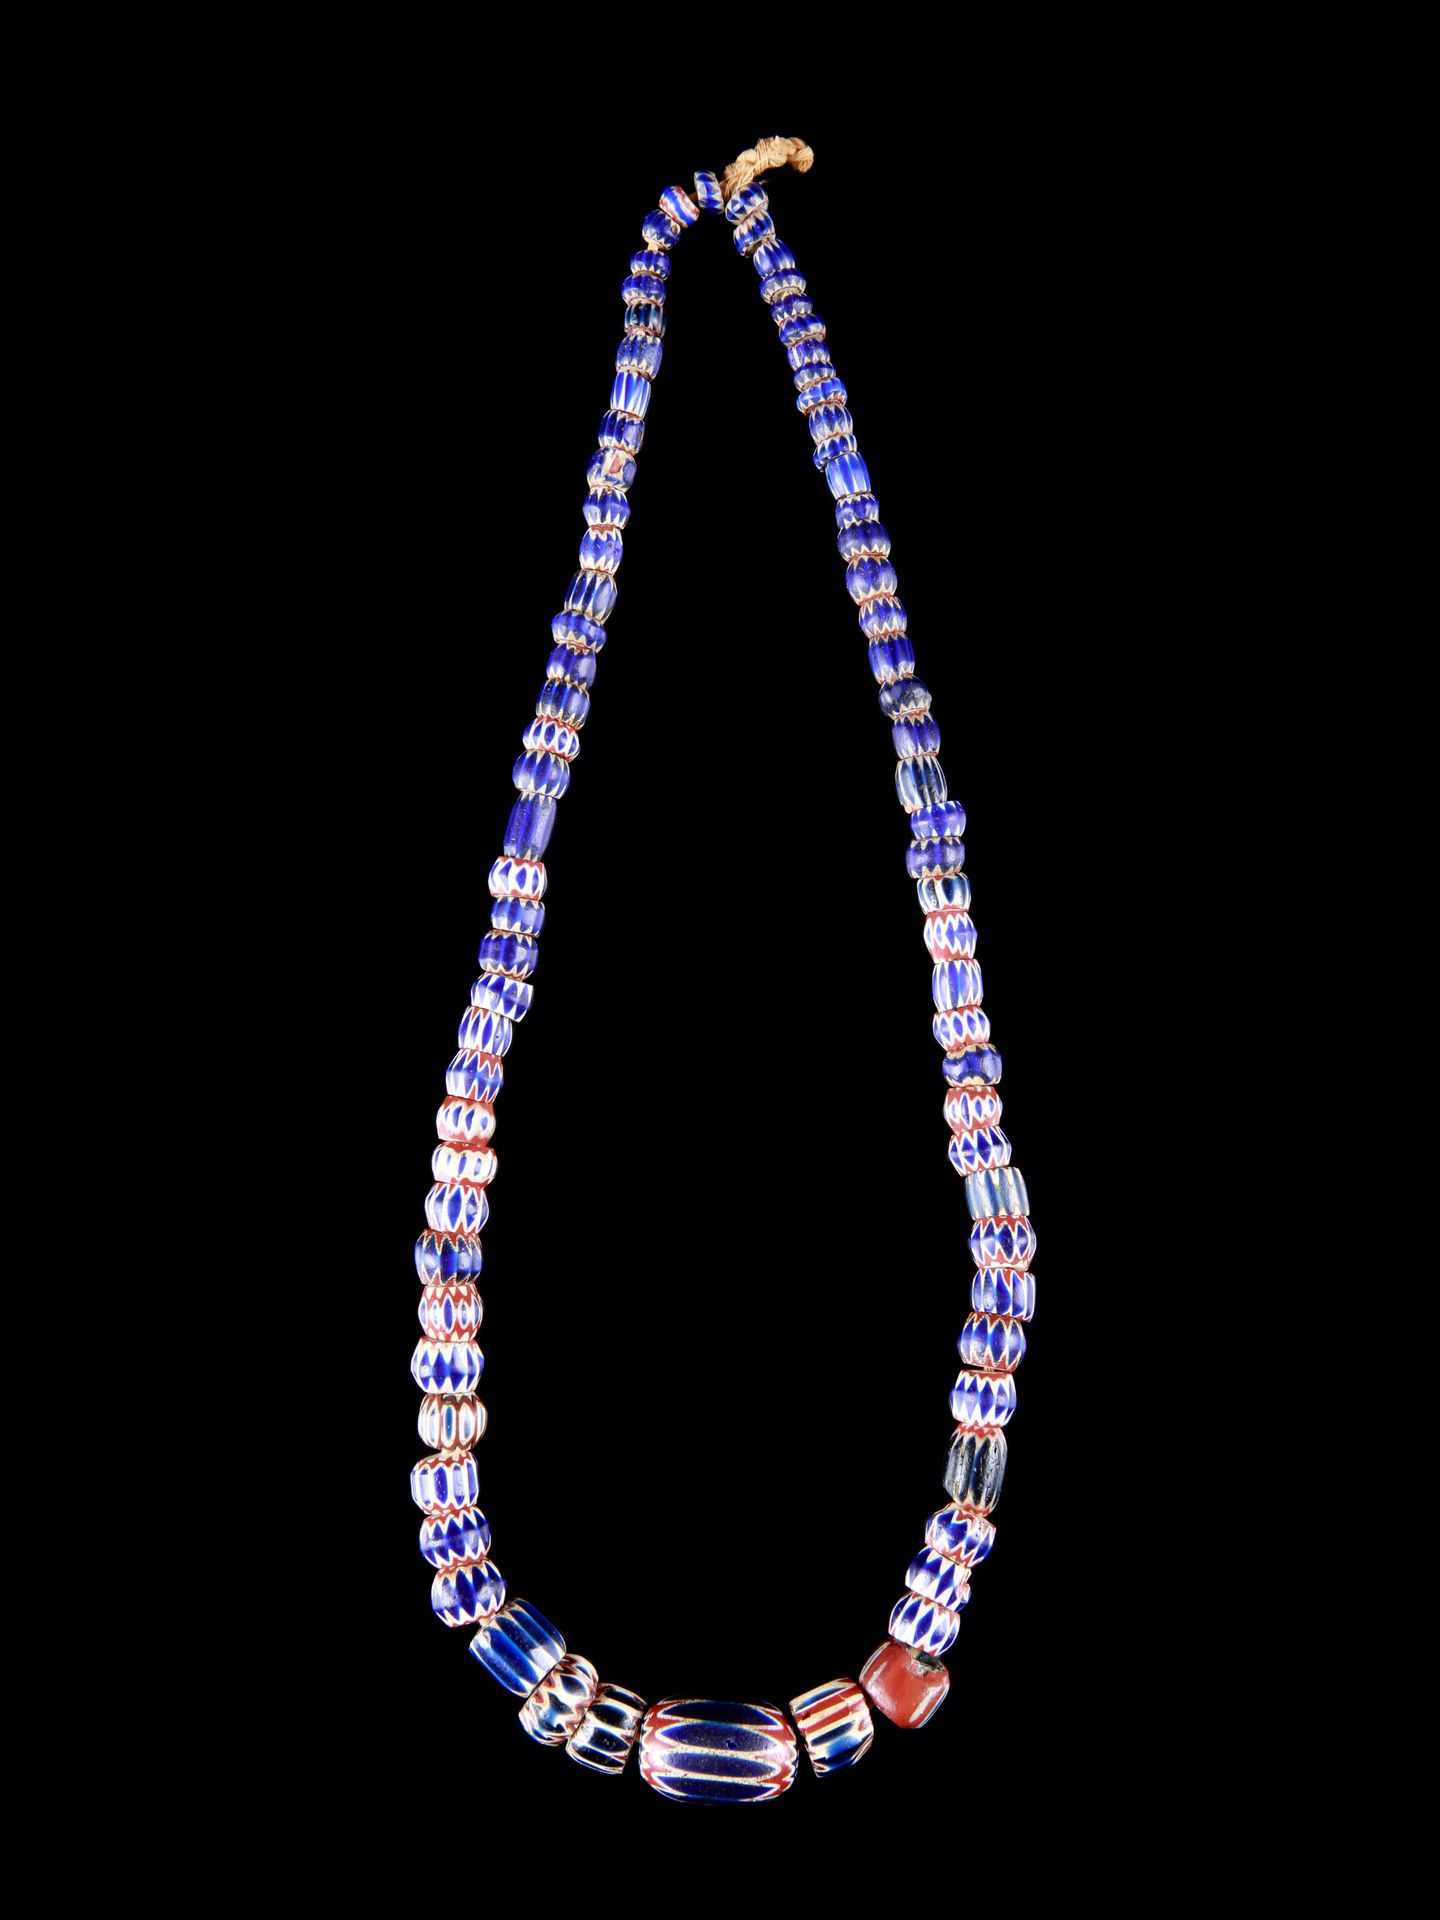 An Italian Chevron Beads Necklace Necklace, chevron beads

Italy / West Africa

&hellip;